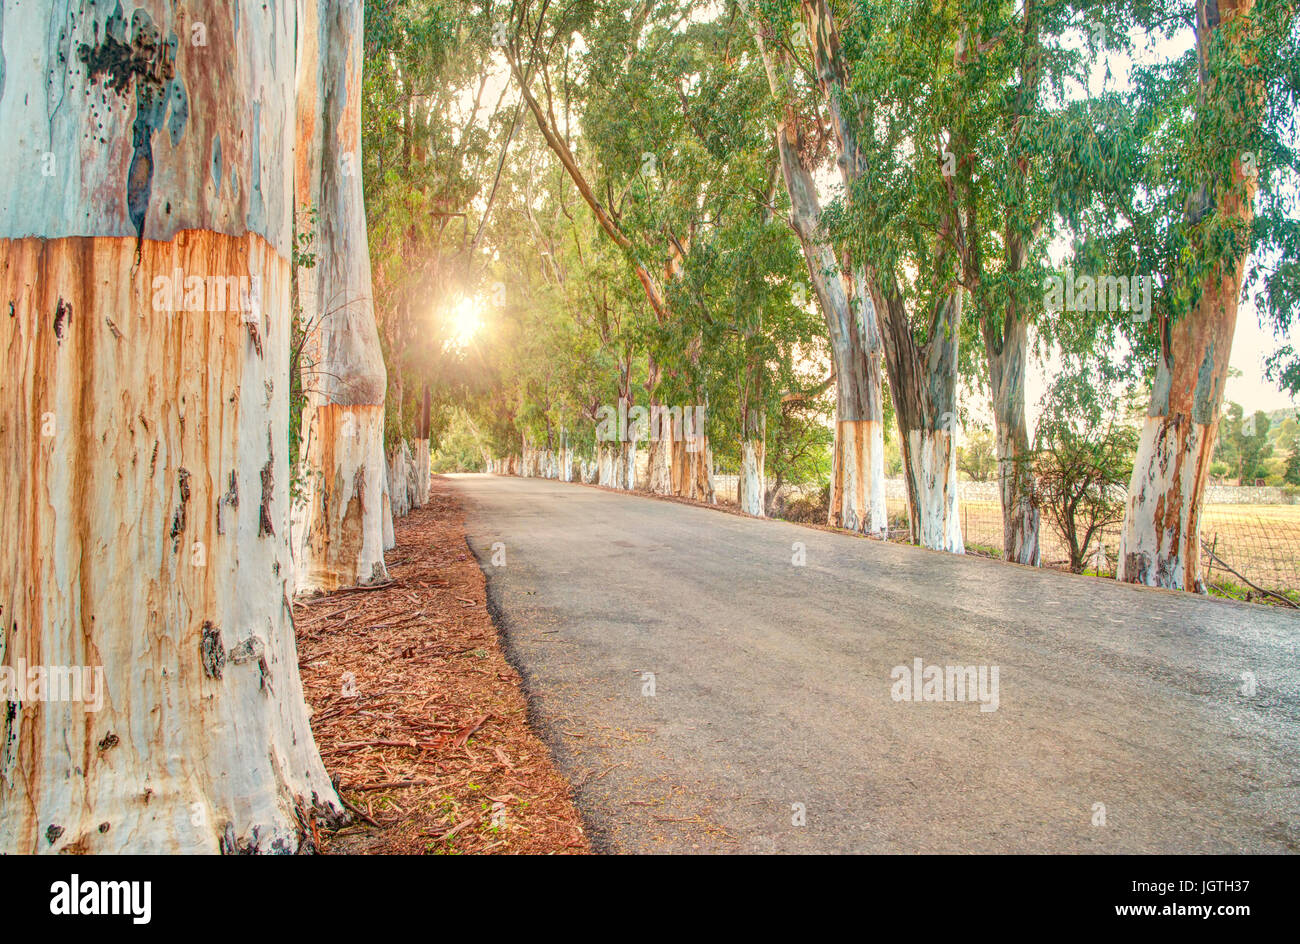 eucaliptus tree alley at sunset with sun shining through leaves, Crete, Greece Stock Photo